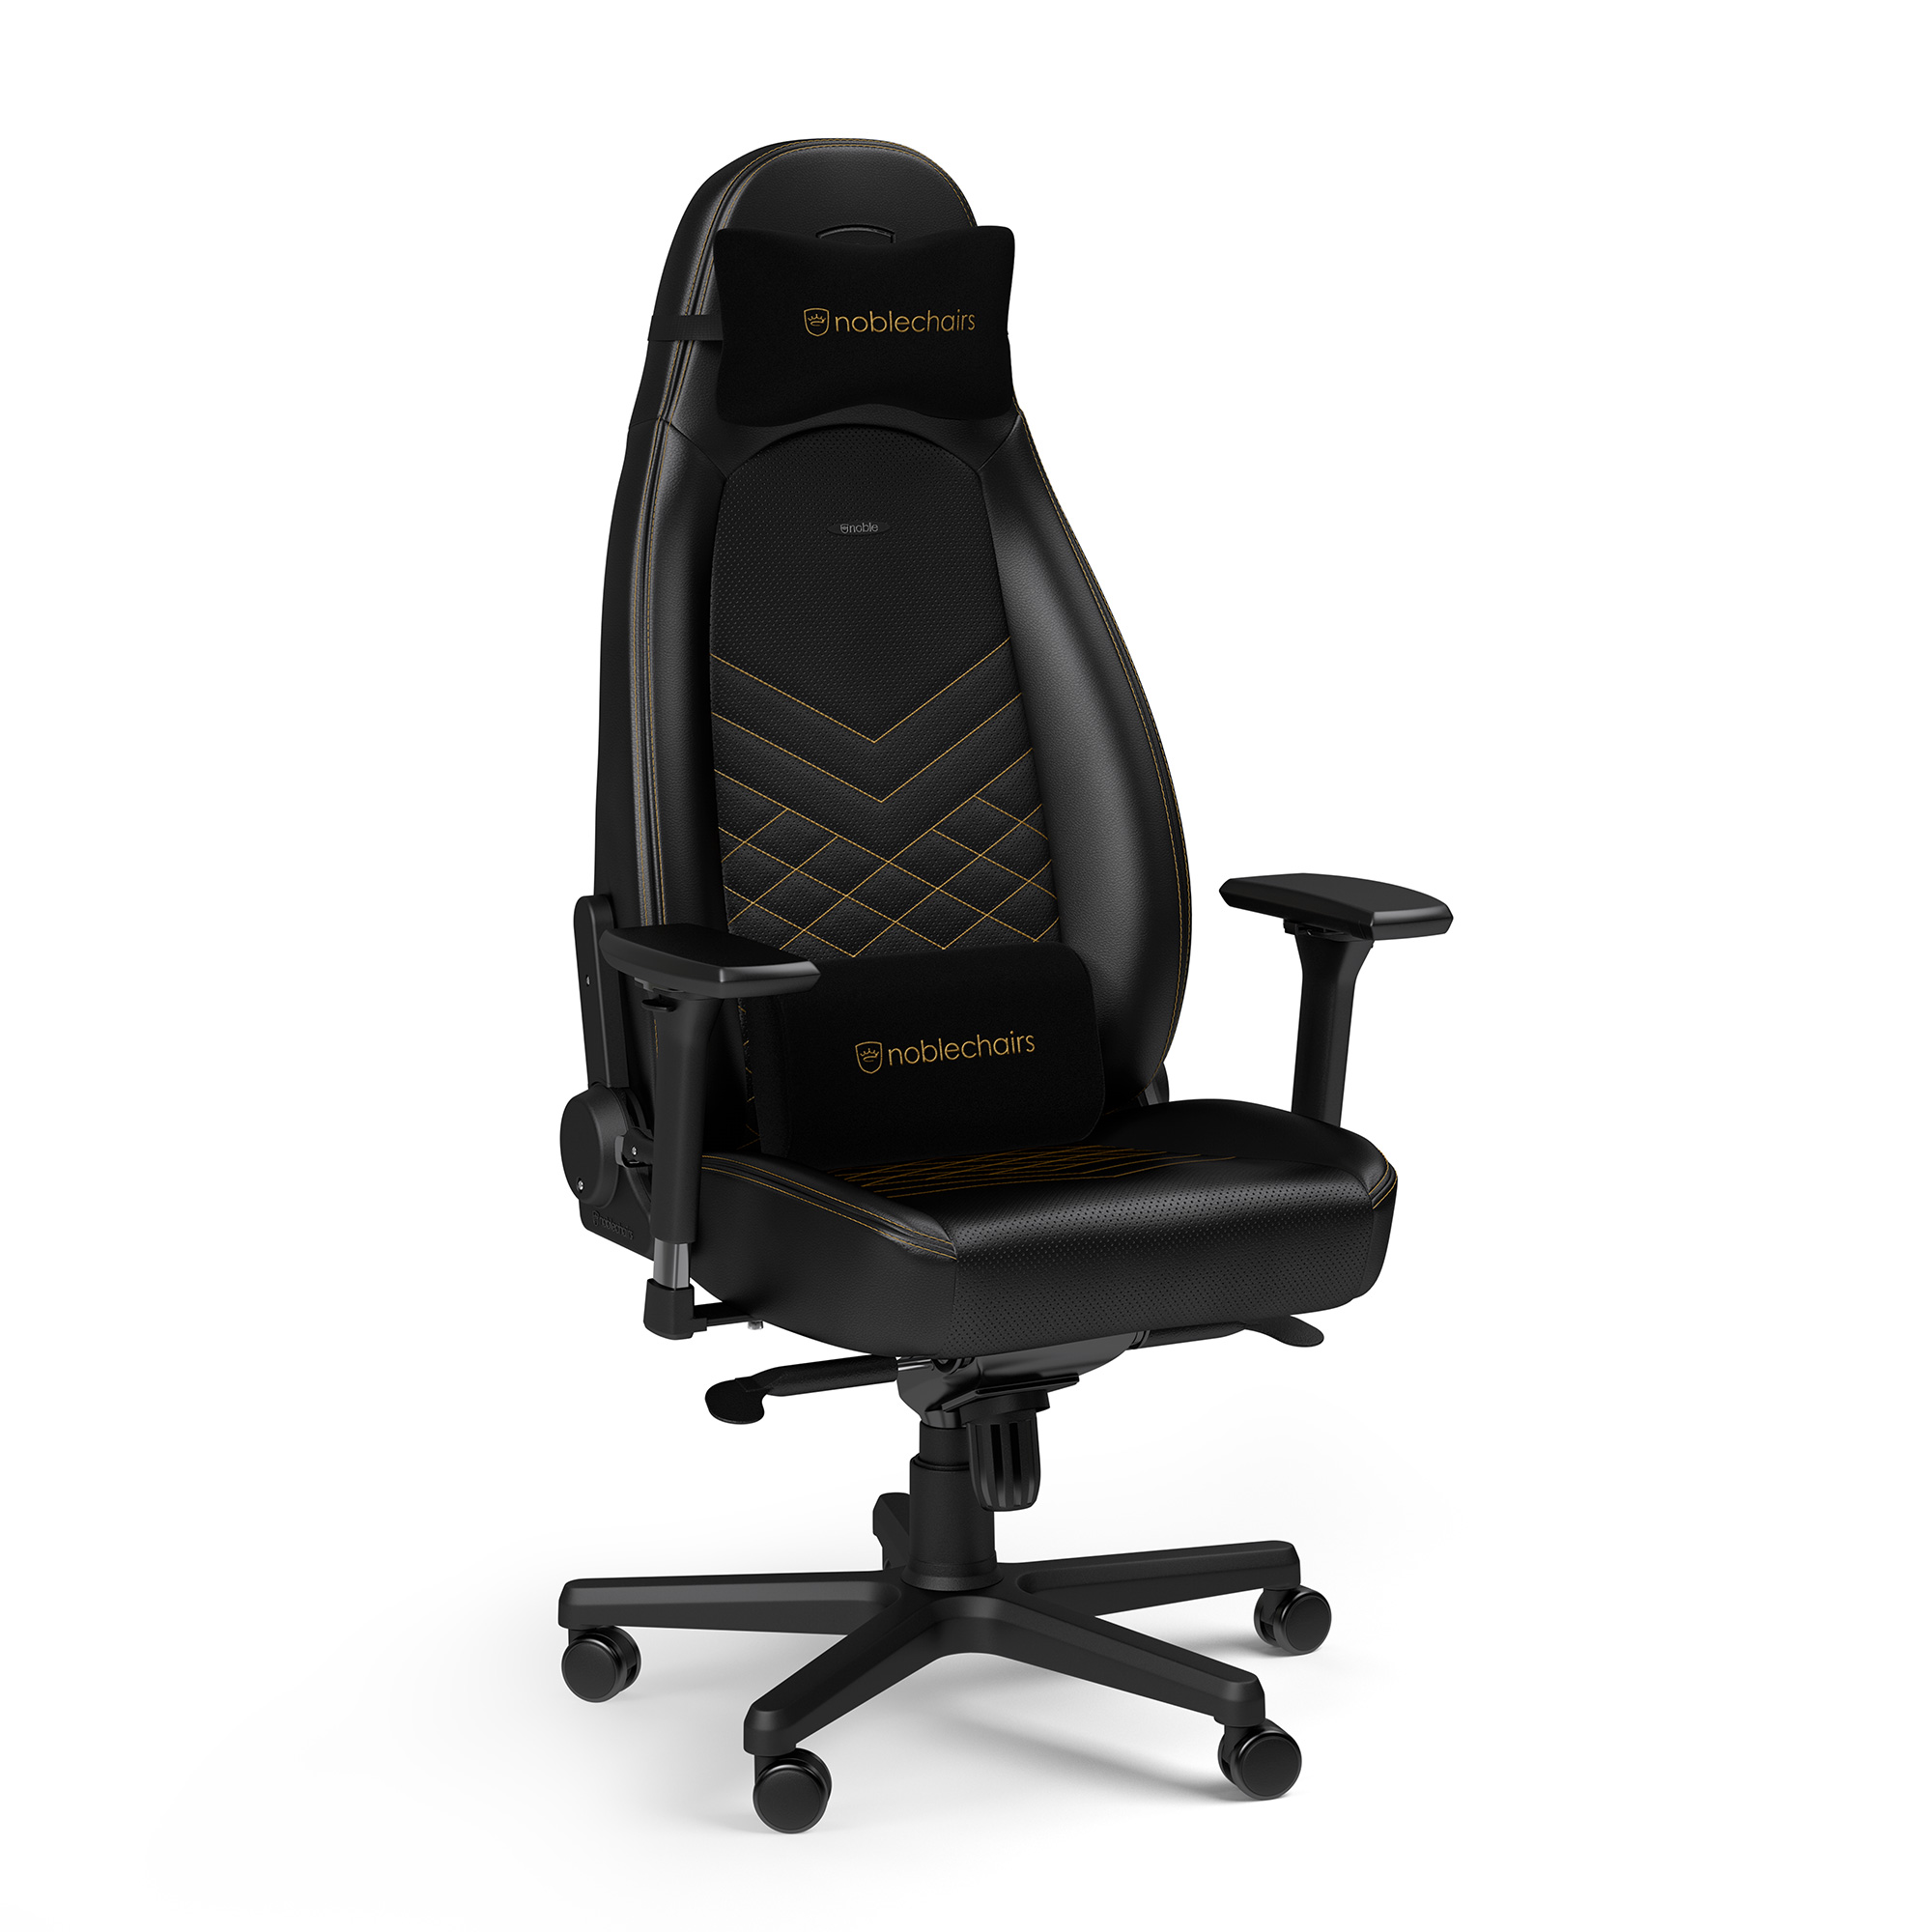 noblechairs - noblechairs ICON Gaming Chair - Black/Gold